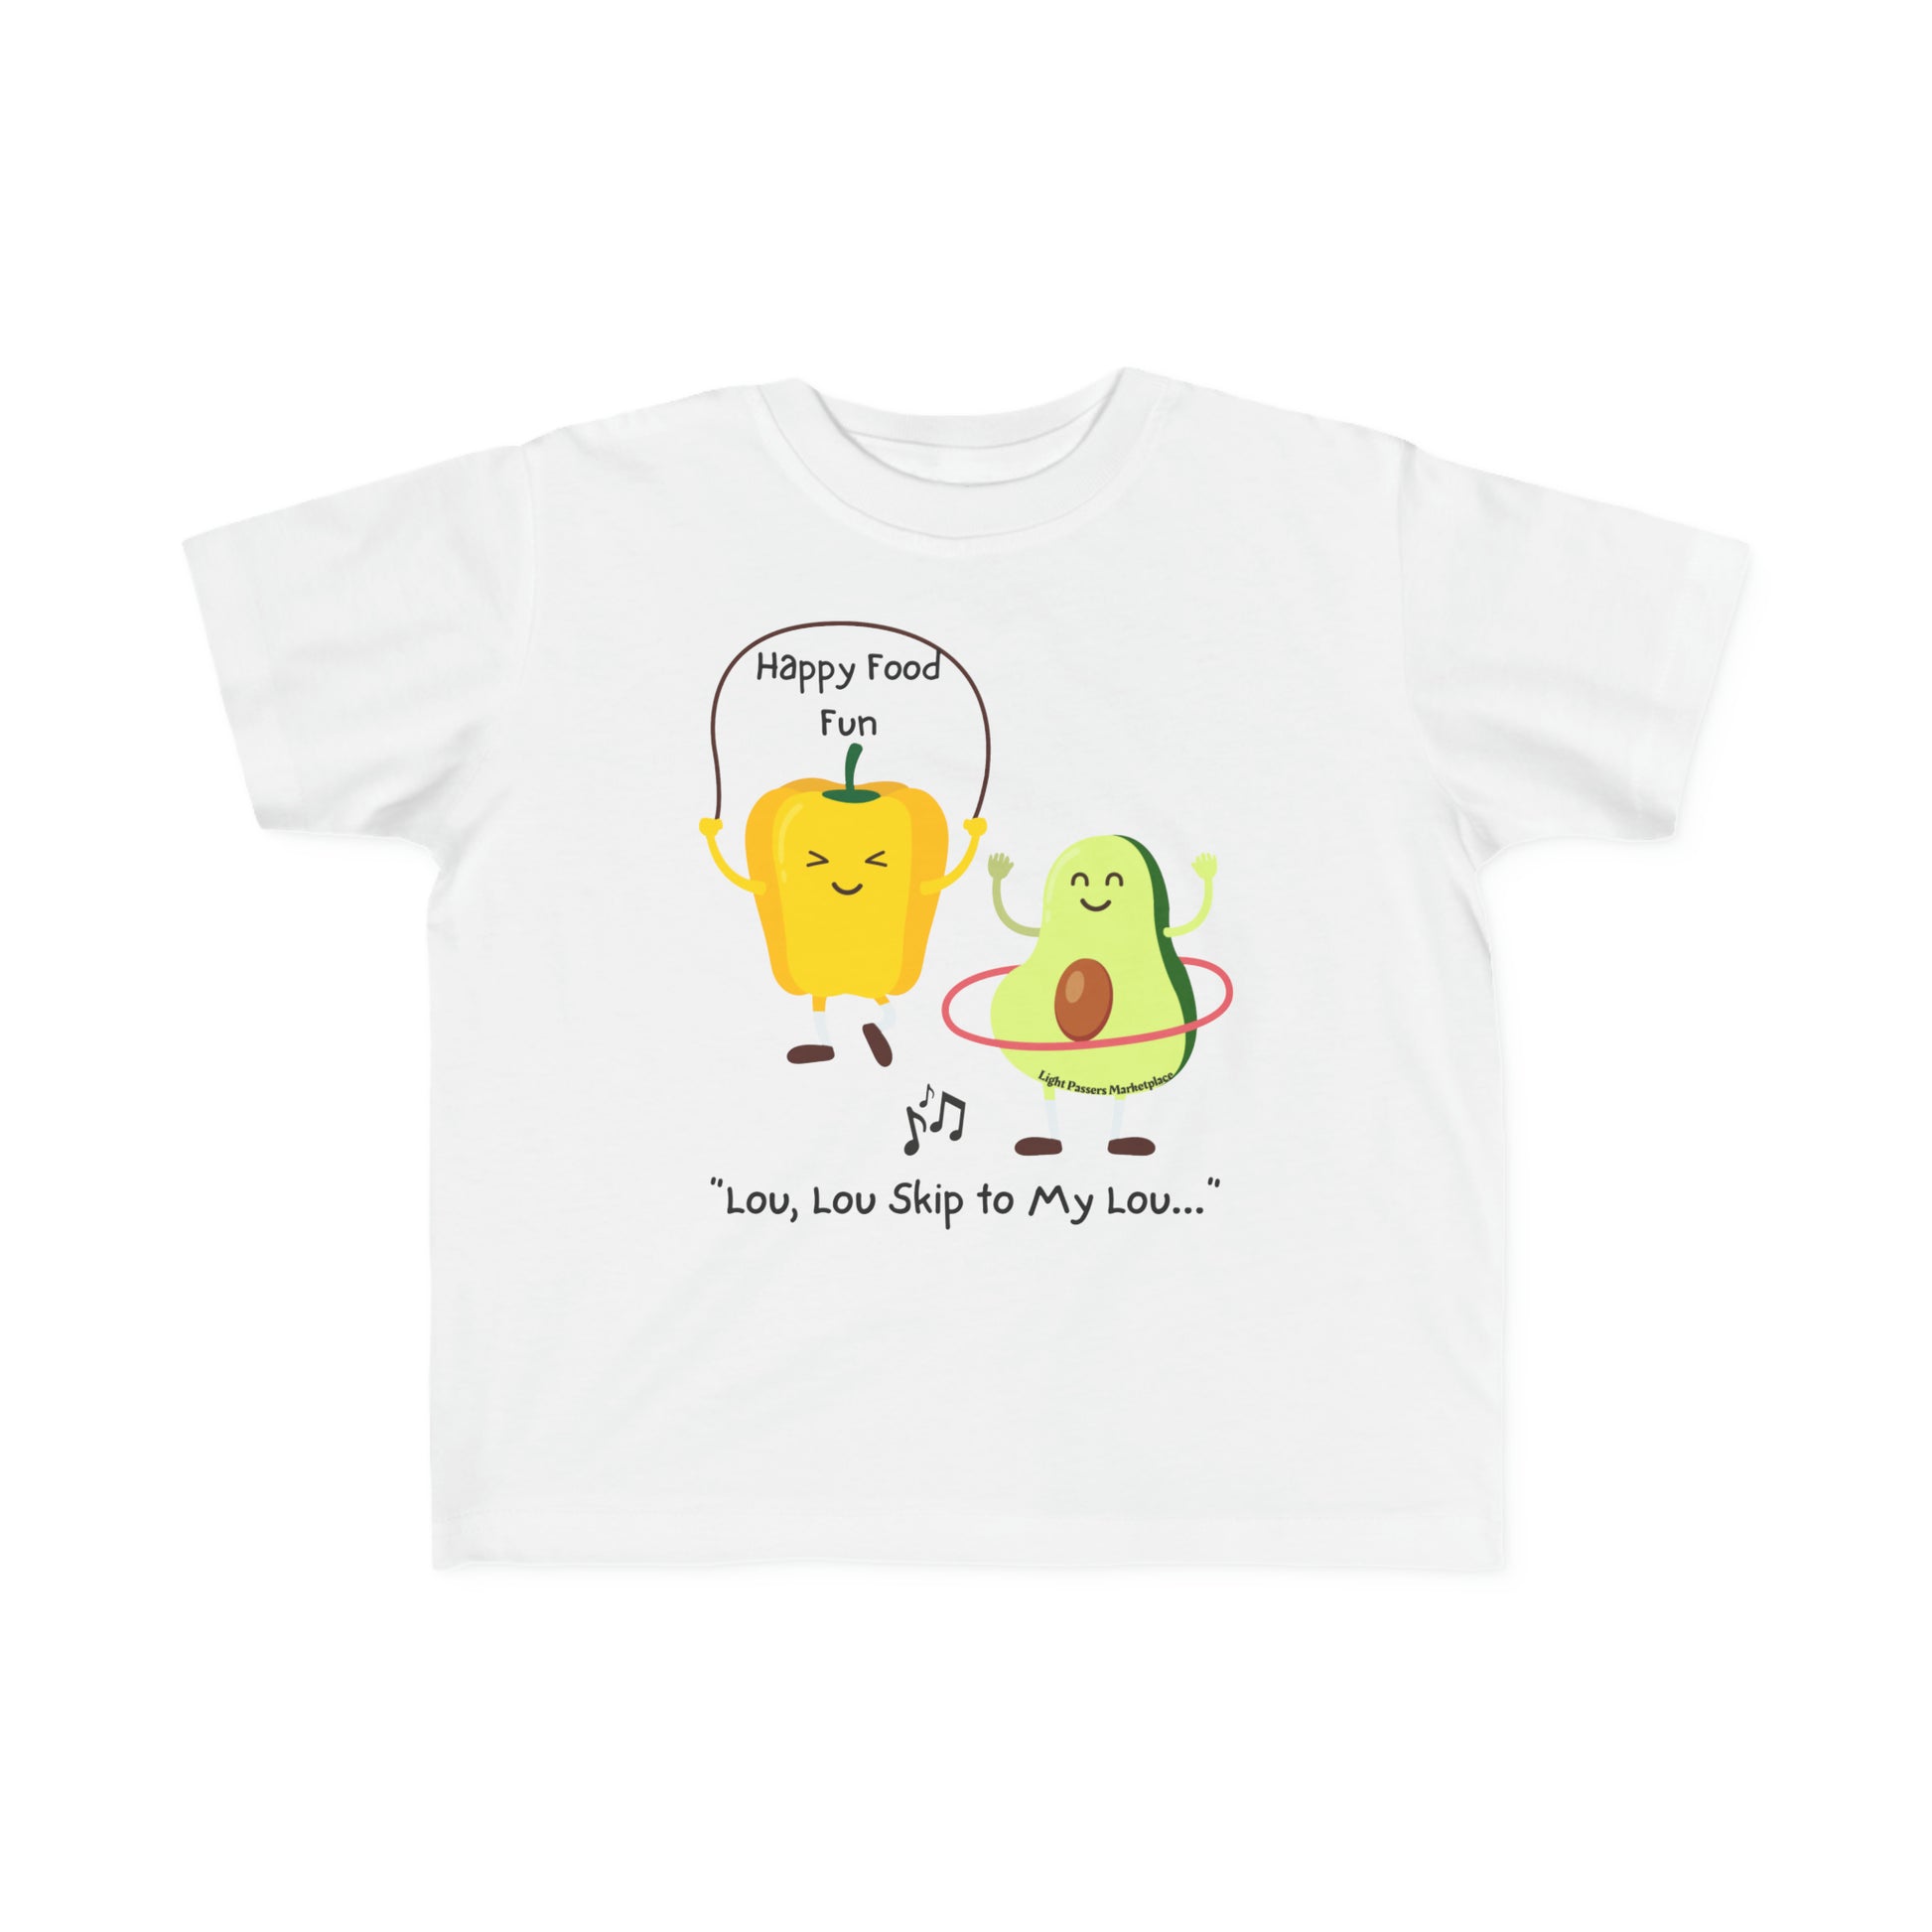 A Skip To My Lou Toddler T-shirt featuring cartoon characters of vegetables exercising on a white shirt. Made of soft 100% combed cotton, light fabric, tear-away label, and a classic fit.